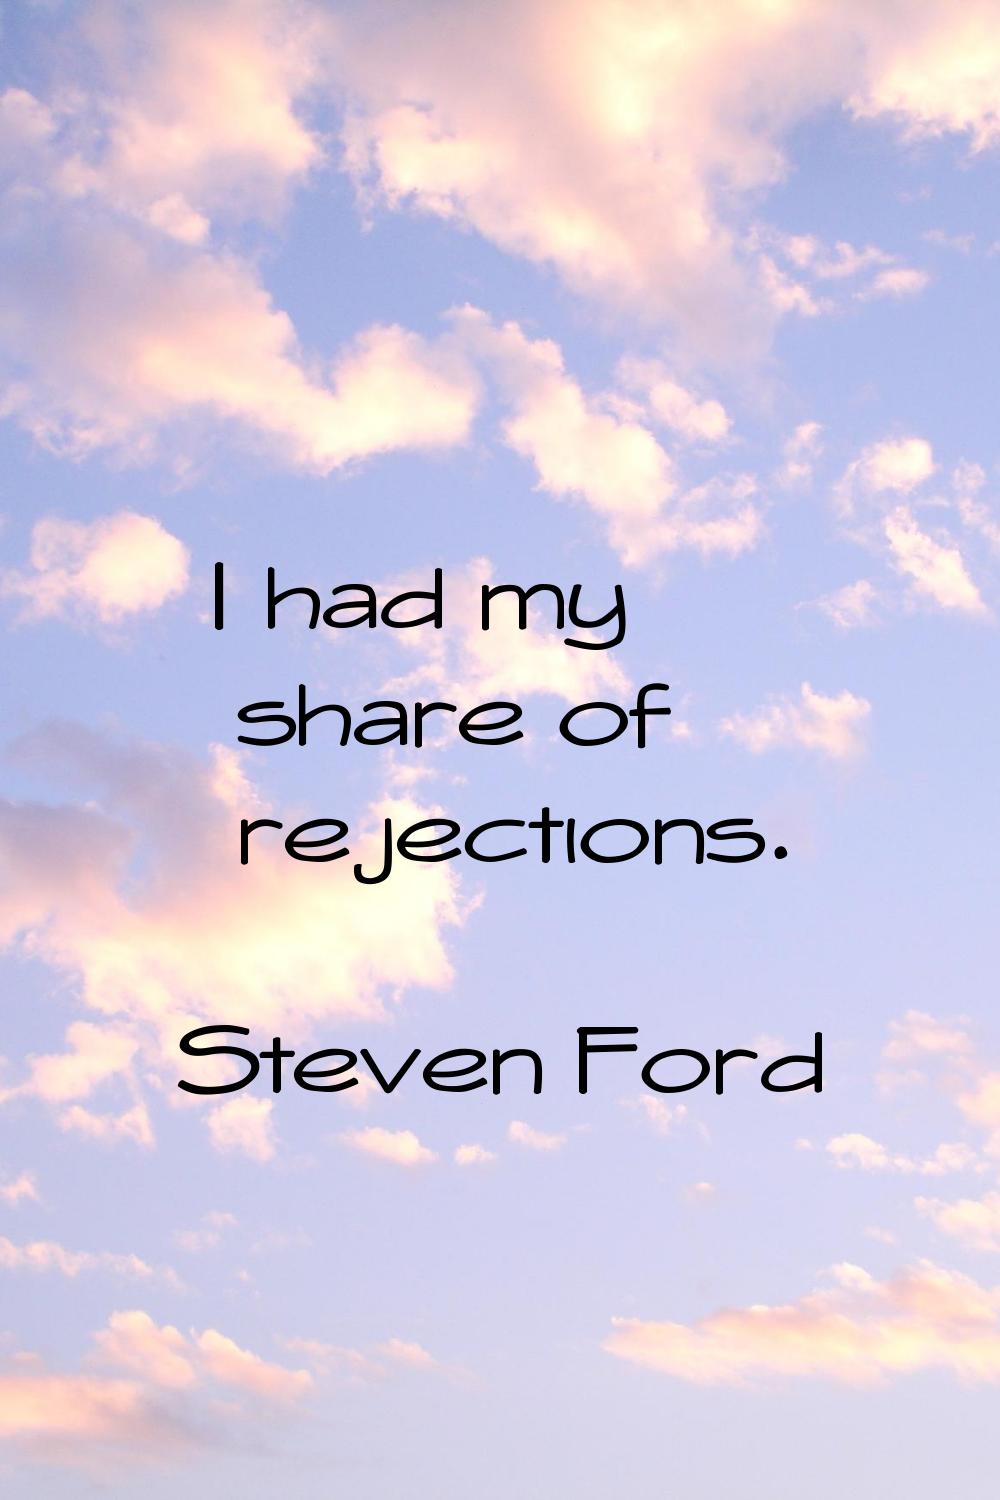 I had my share of rejections.